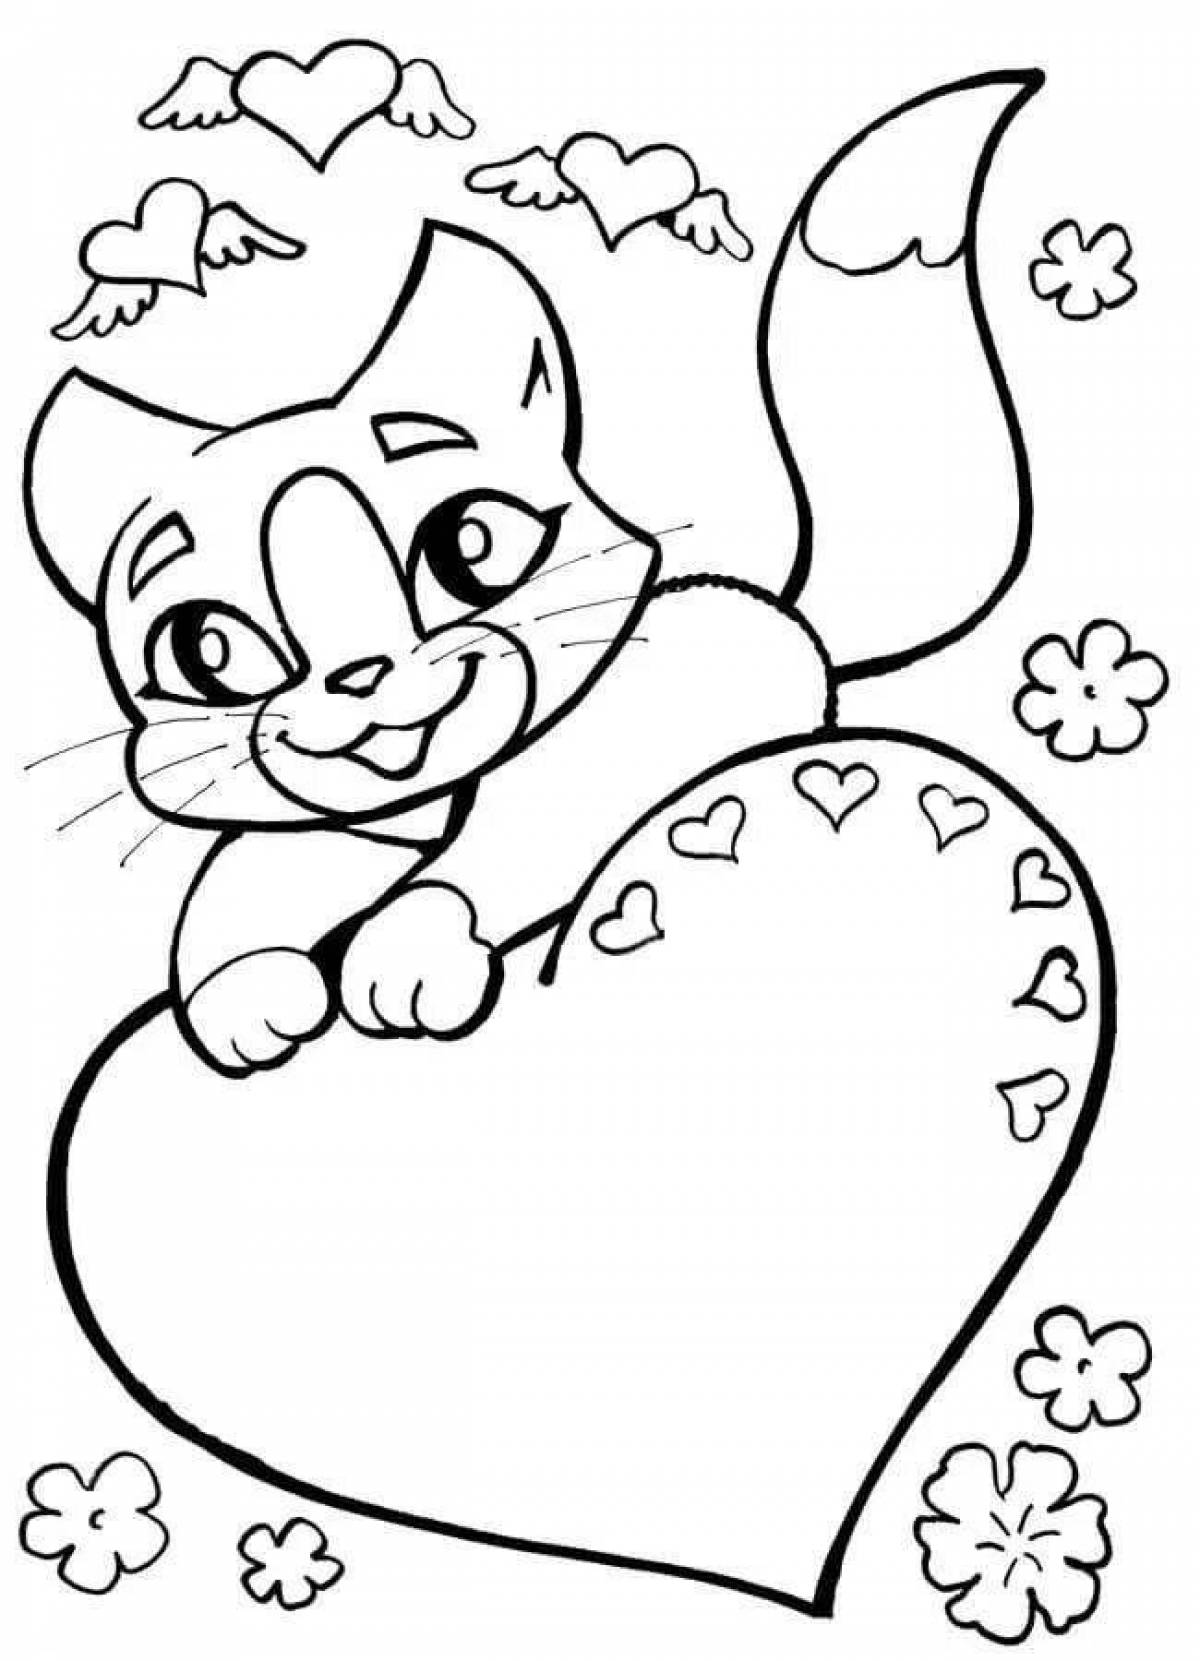 Coloring page funny cat with a heart